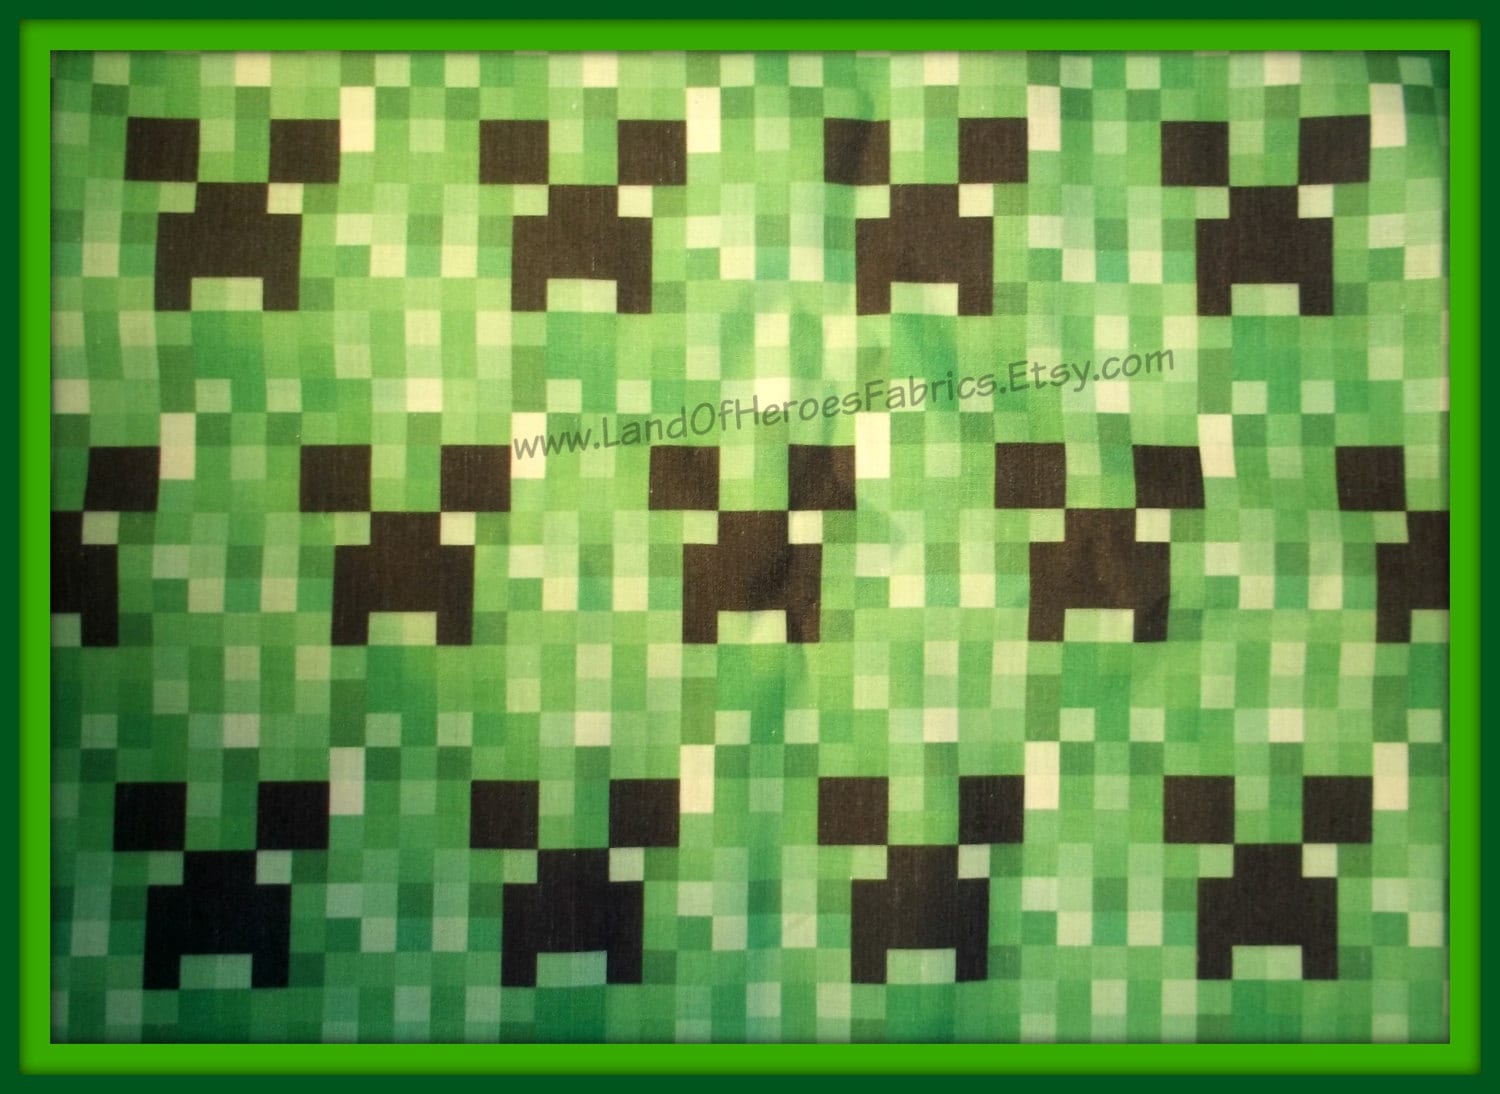 Minecraft Logo Fabric 56 Inch Width Cotton-Poly 0NLY
